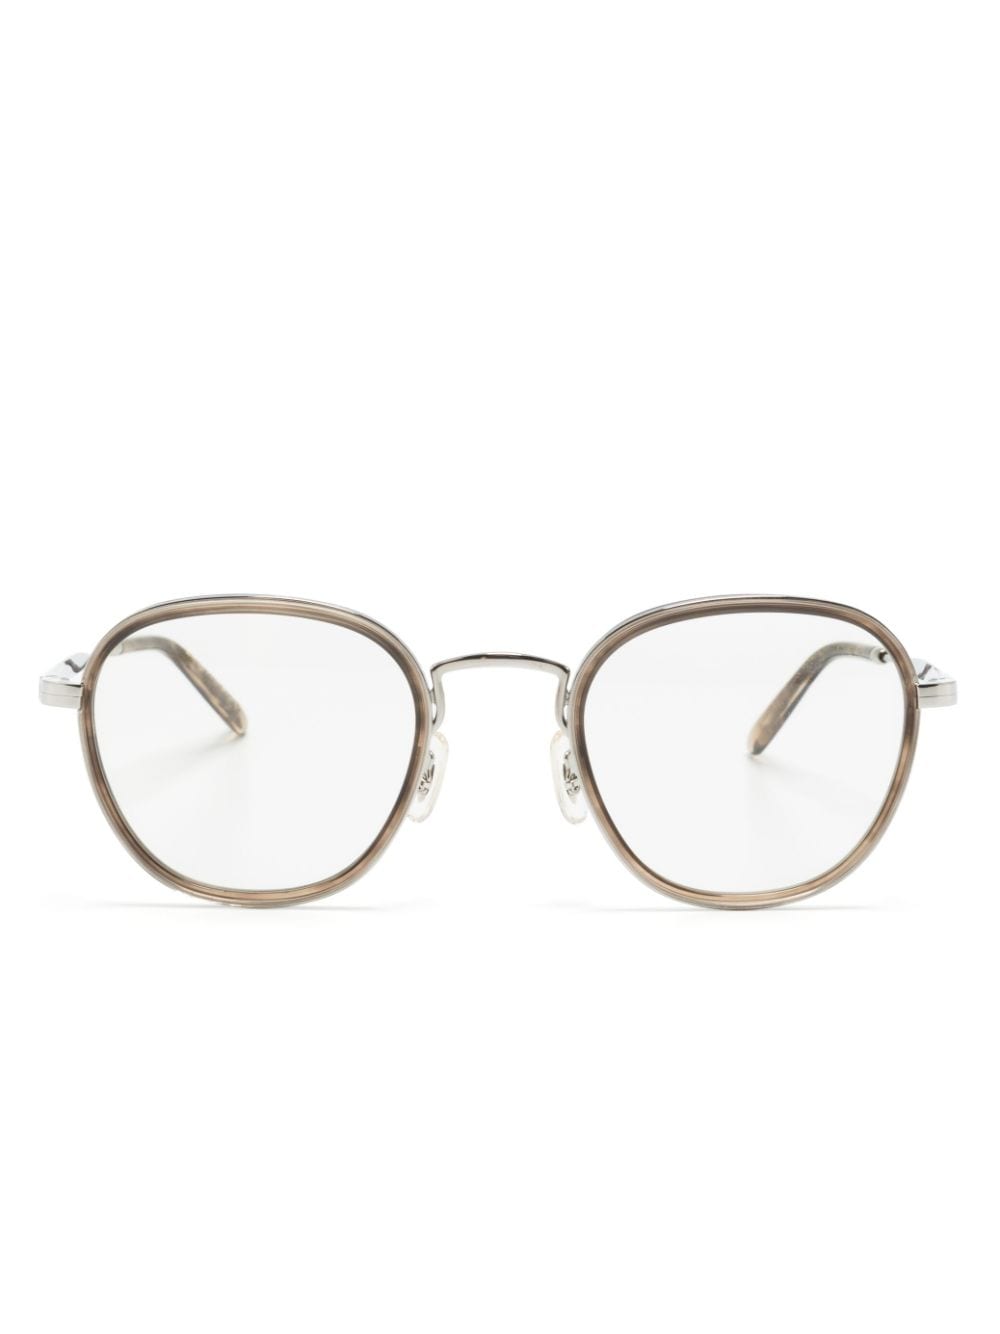 Oliver Peoples Lilletto-R round-frame glasses - Metallic von Oliver Peoples